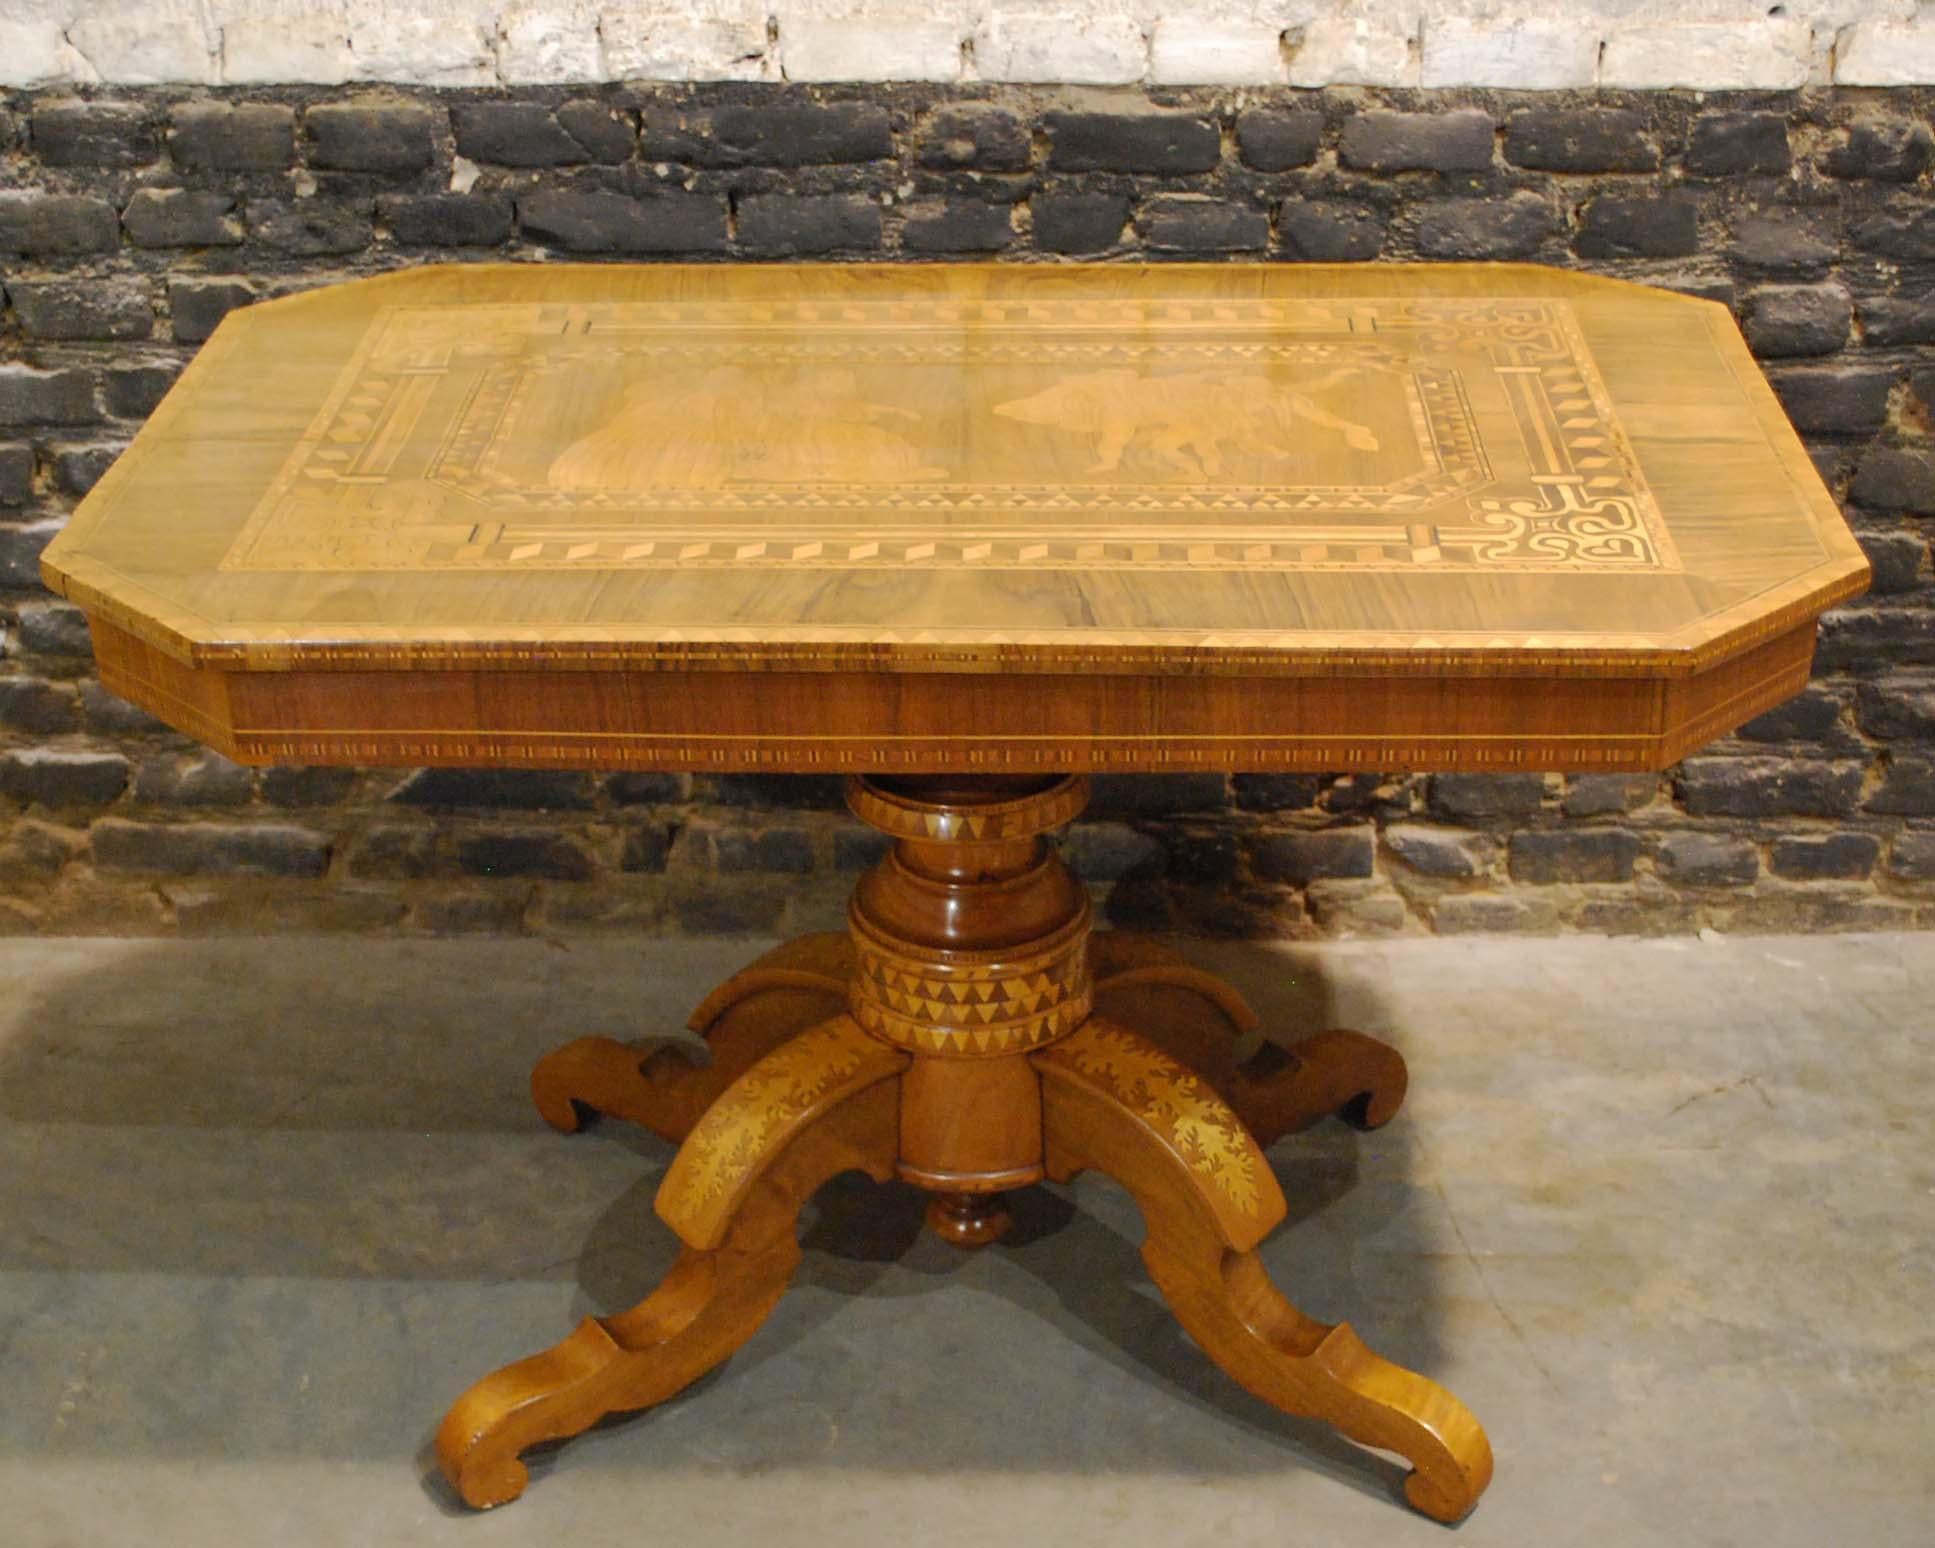 A wonderful heavily decorated tilt-top table made in Italy, circa 1870.
The table has a rectangular top with chamfered corners. It features a central picture from a Shakespeare scene in Marquetry. The scene is Act V, scene 2 from Hamlet: The point